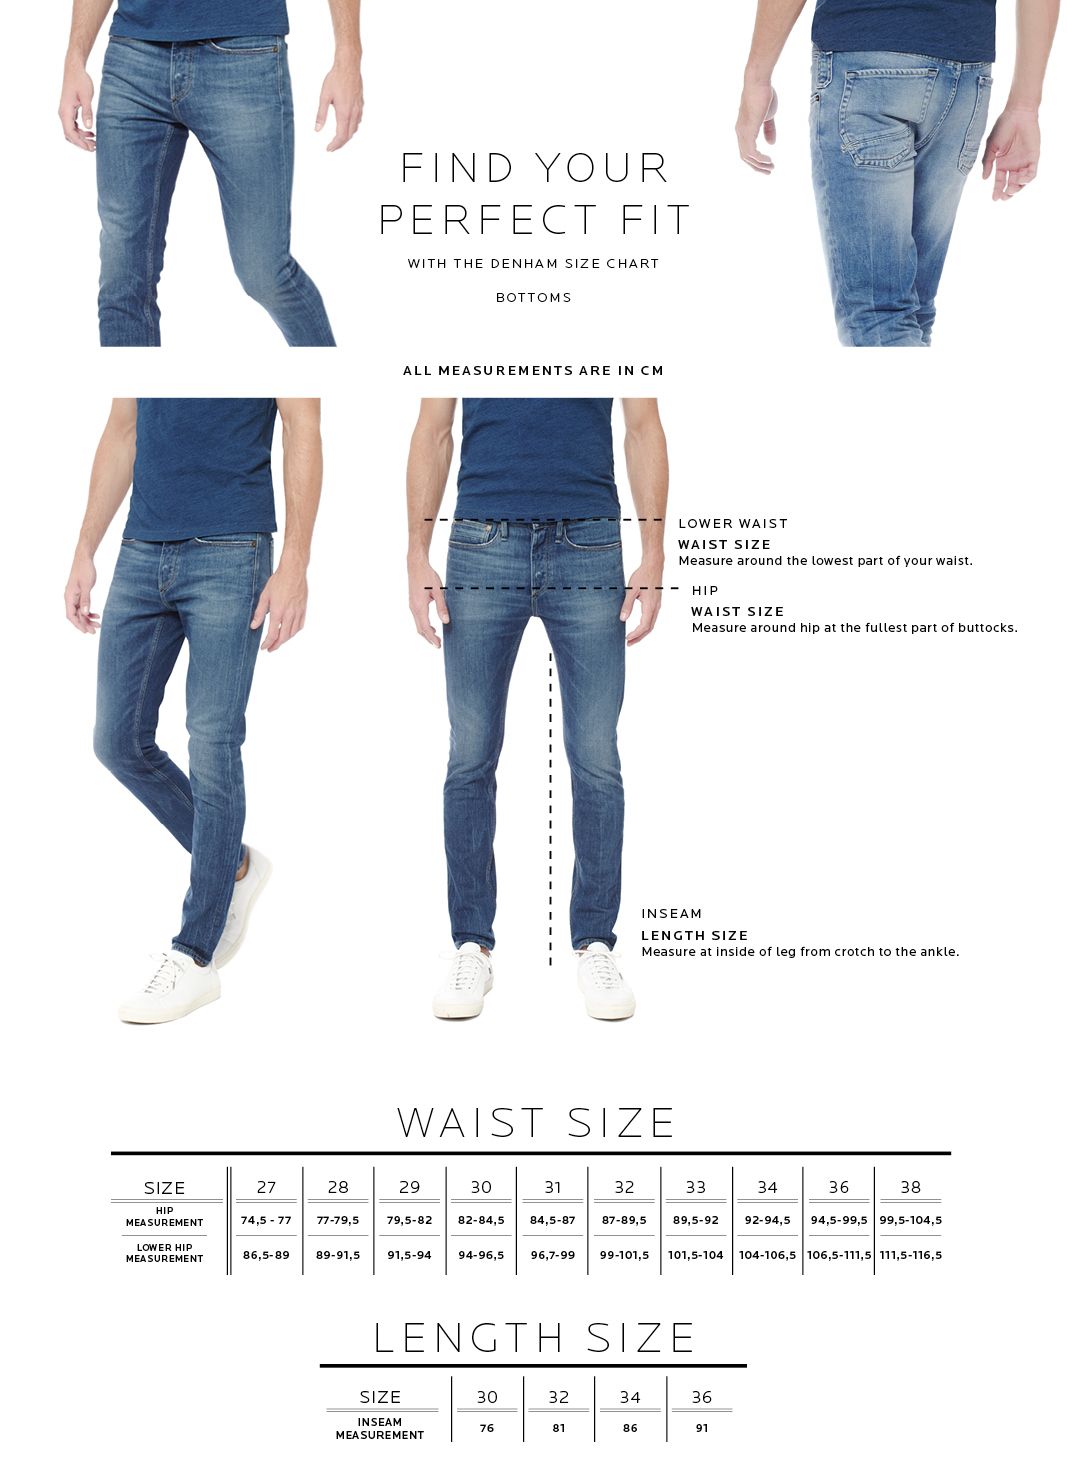 Find Your Perfect Fit: The Ultimate Gap Maternity Jeans Size Chart Guide